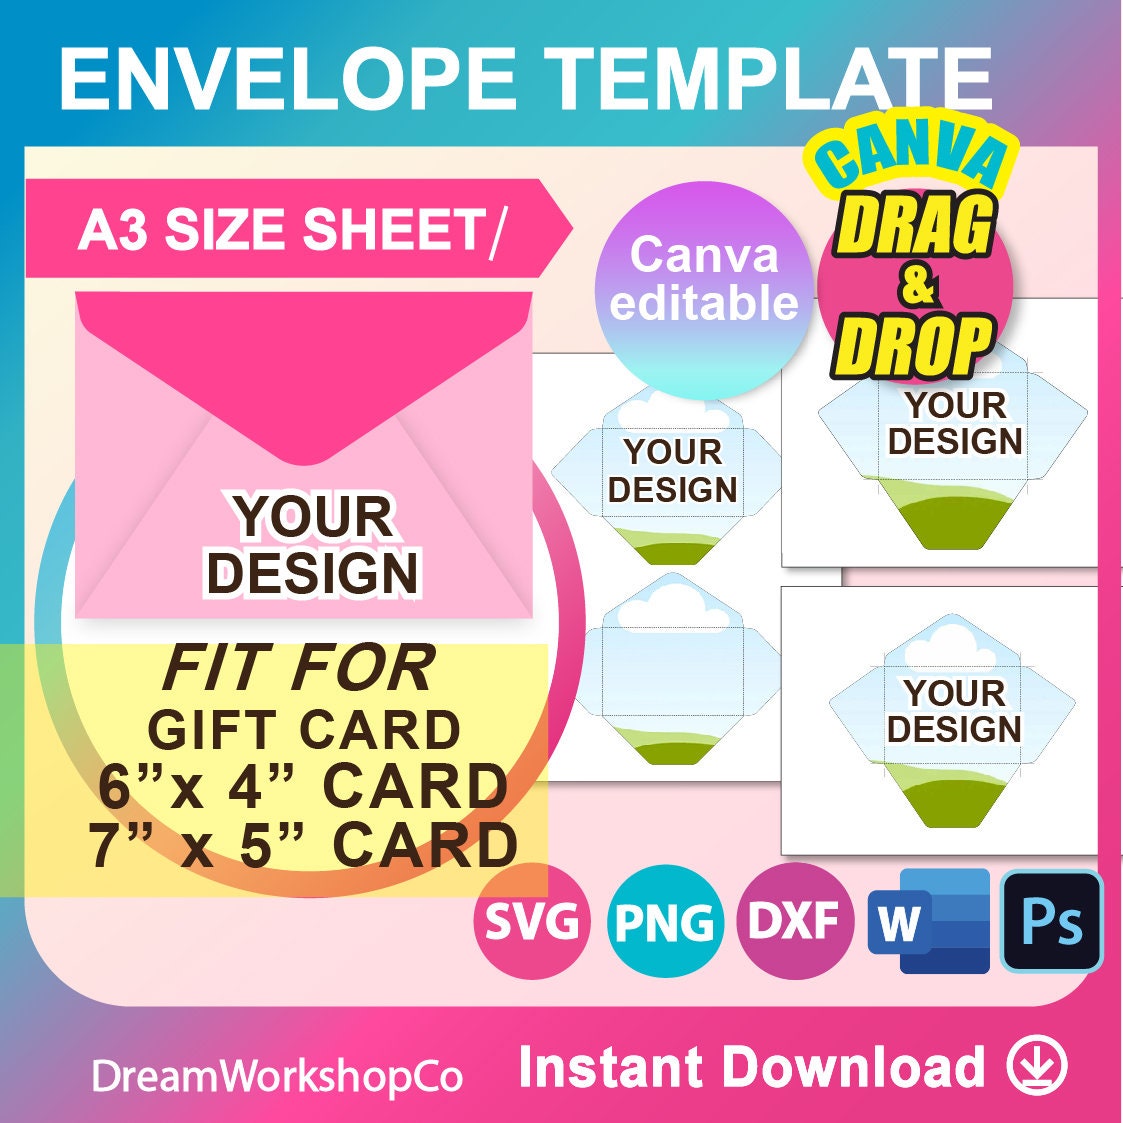 5x7 and 4x6 Greeting Card Templates Instant Download DIY Card